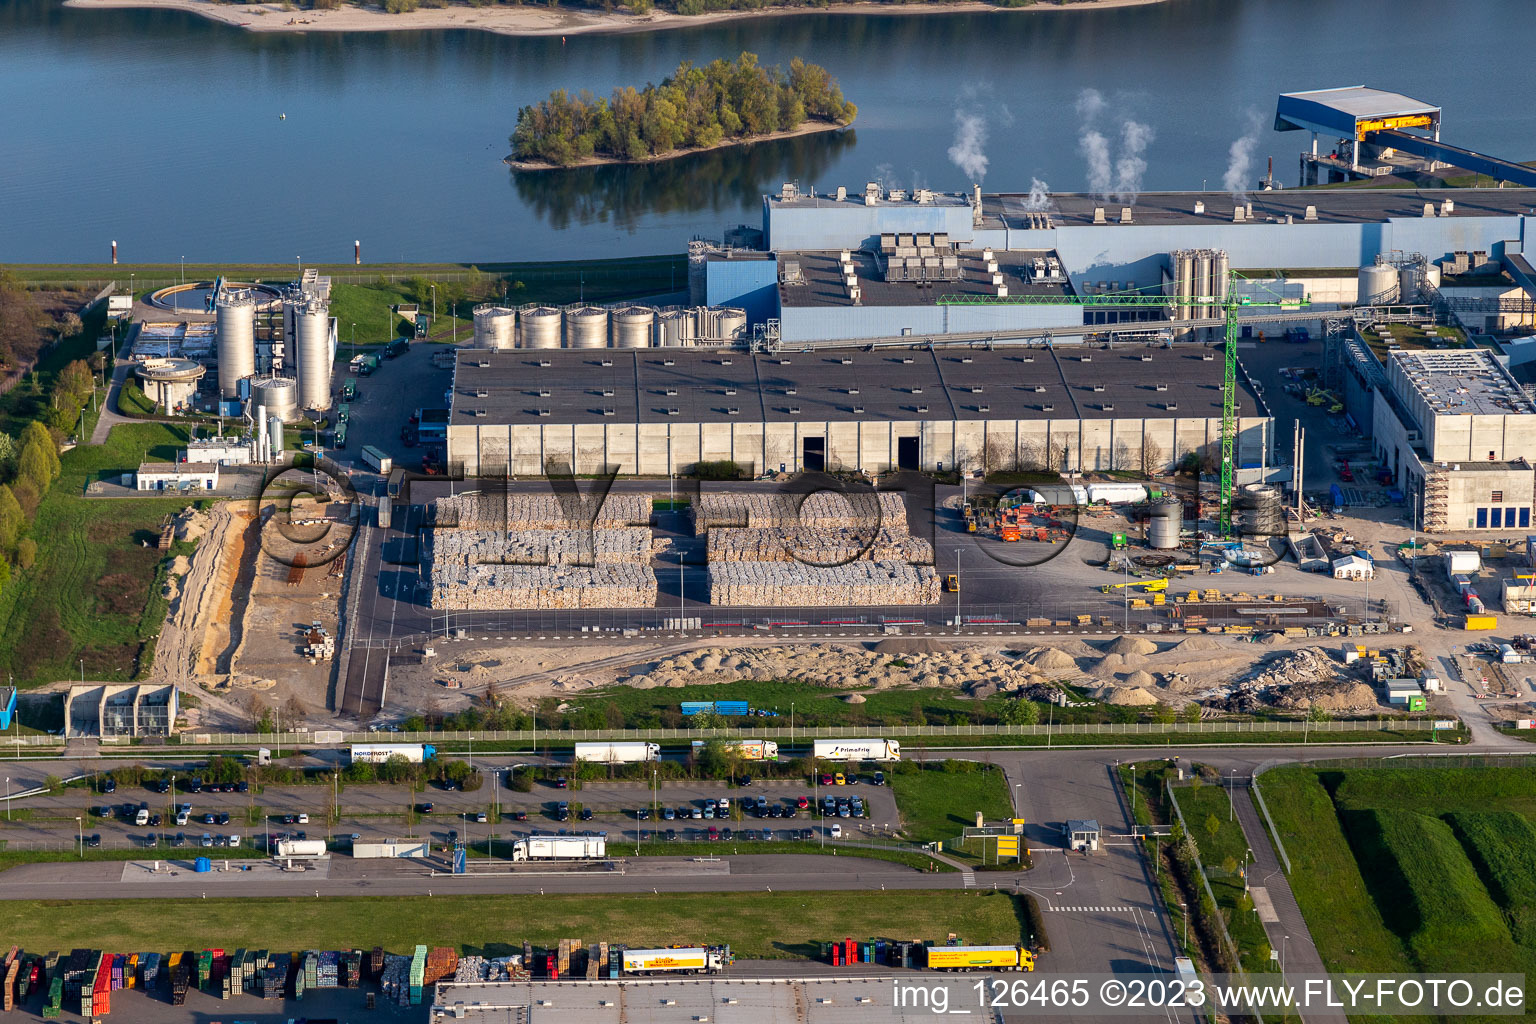 Construction of the new gas- hydrogen-power plant at paer mill Papierfabrik Palm GmbH & Co. KG in the district Industriegebiet Woerth-Oberwald in Woerth am Rhein in the state Rhineland-Palatinate from the drone perspective